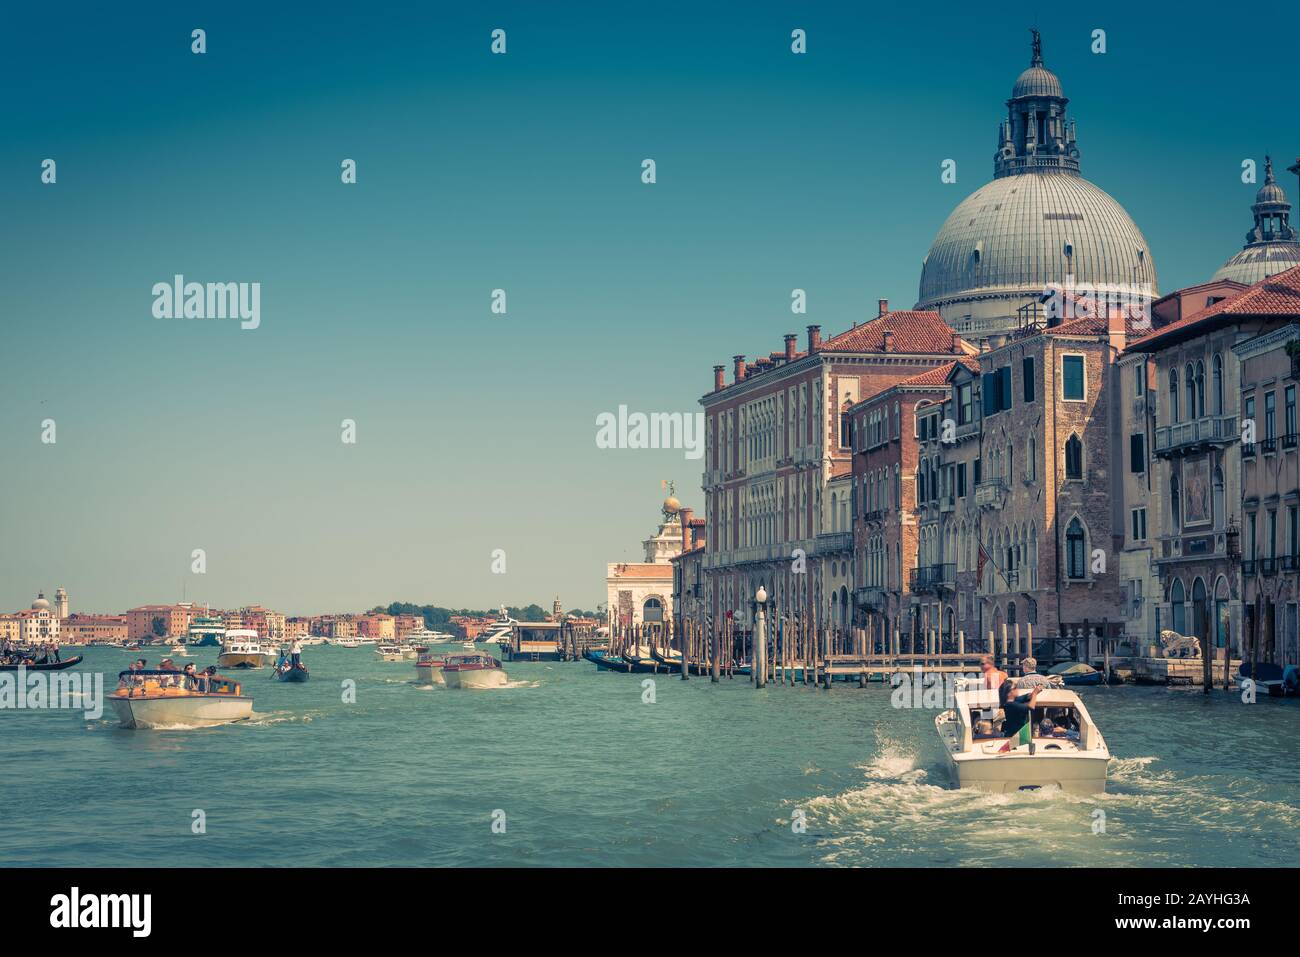 Water taxis and other boats are sailing along the Grand Canal in Venice, Italy. Motor boats are the main transport in Venice. Stock Photo